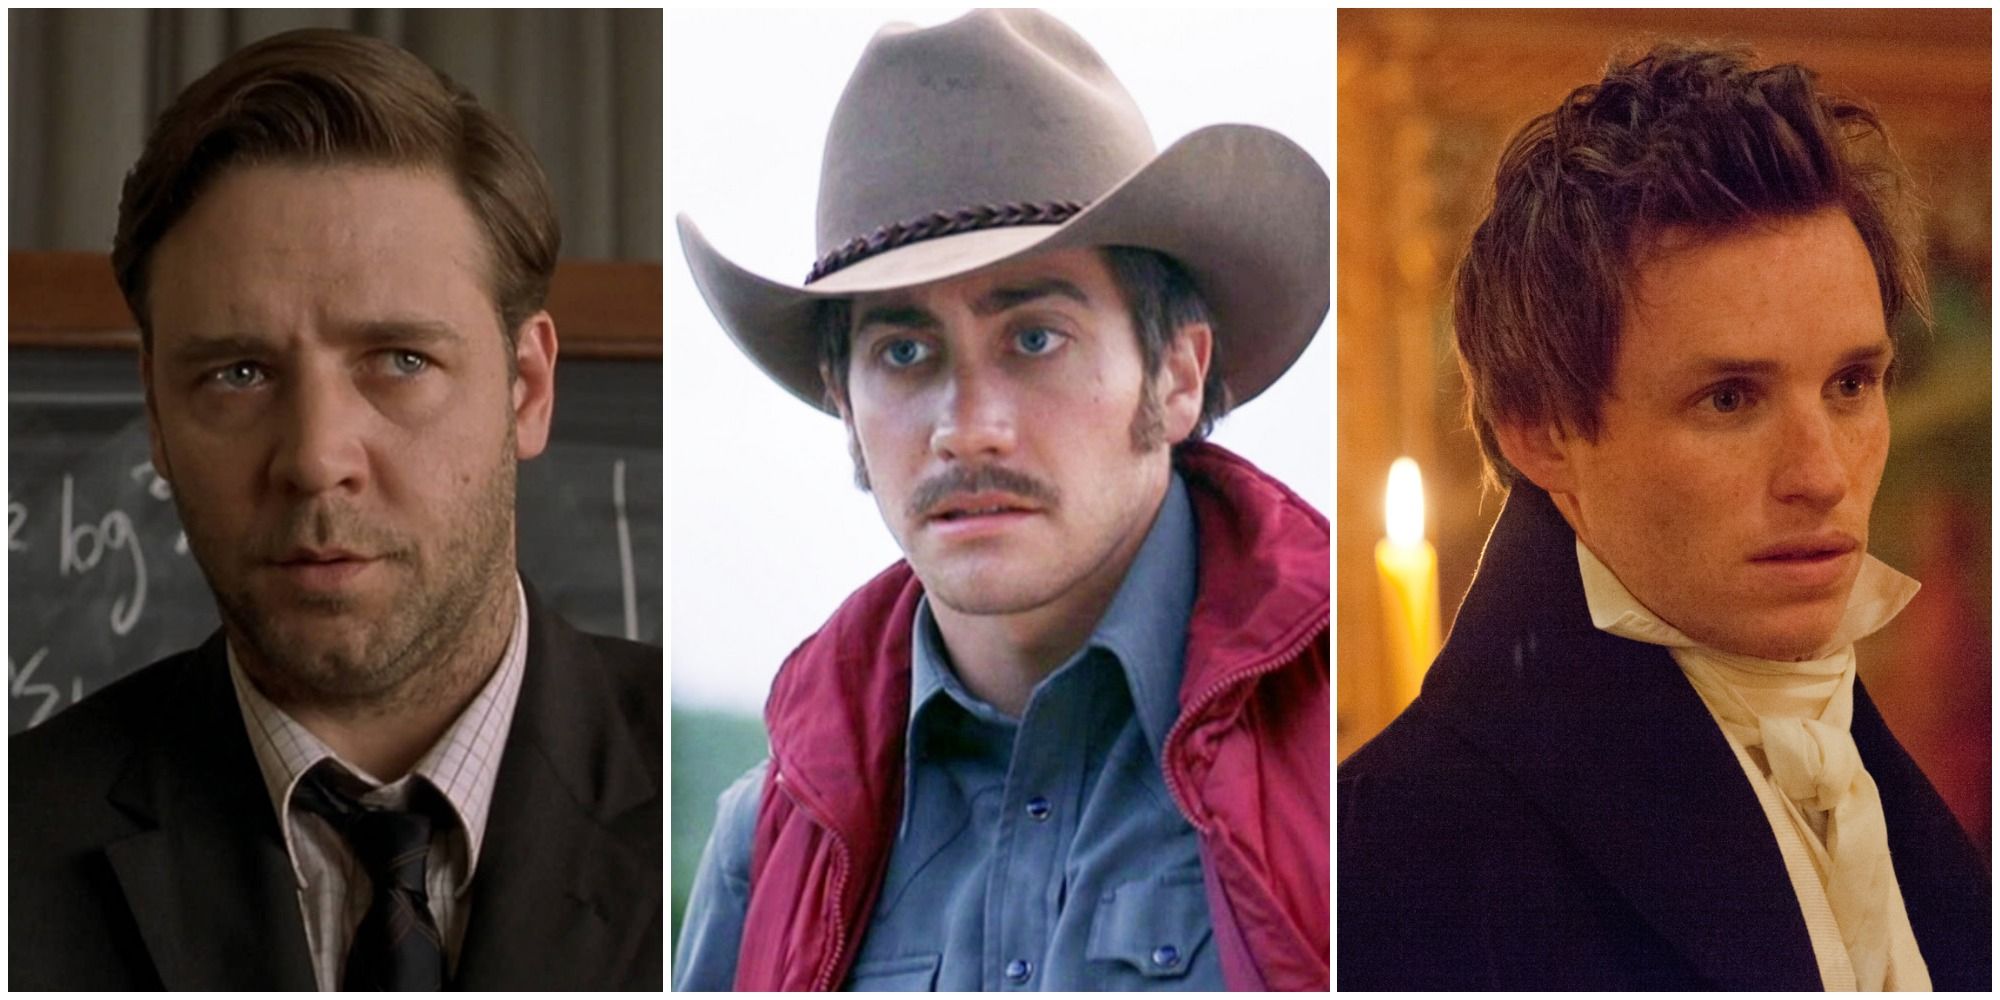 Russell Crowe (left) in 'A Beautiful Mind' (2001), Jake Gyllenhaal in 'Brokeback Mountain' (2005) and Eddie Redmayne (right) in 'Les Misérables' (2012)